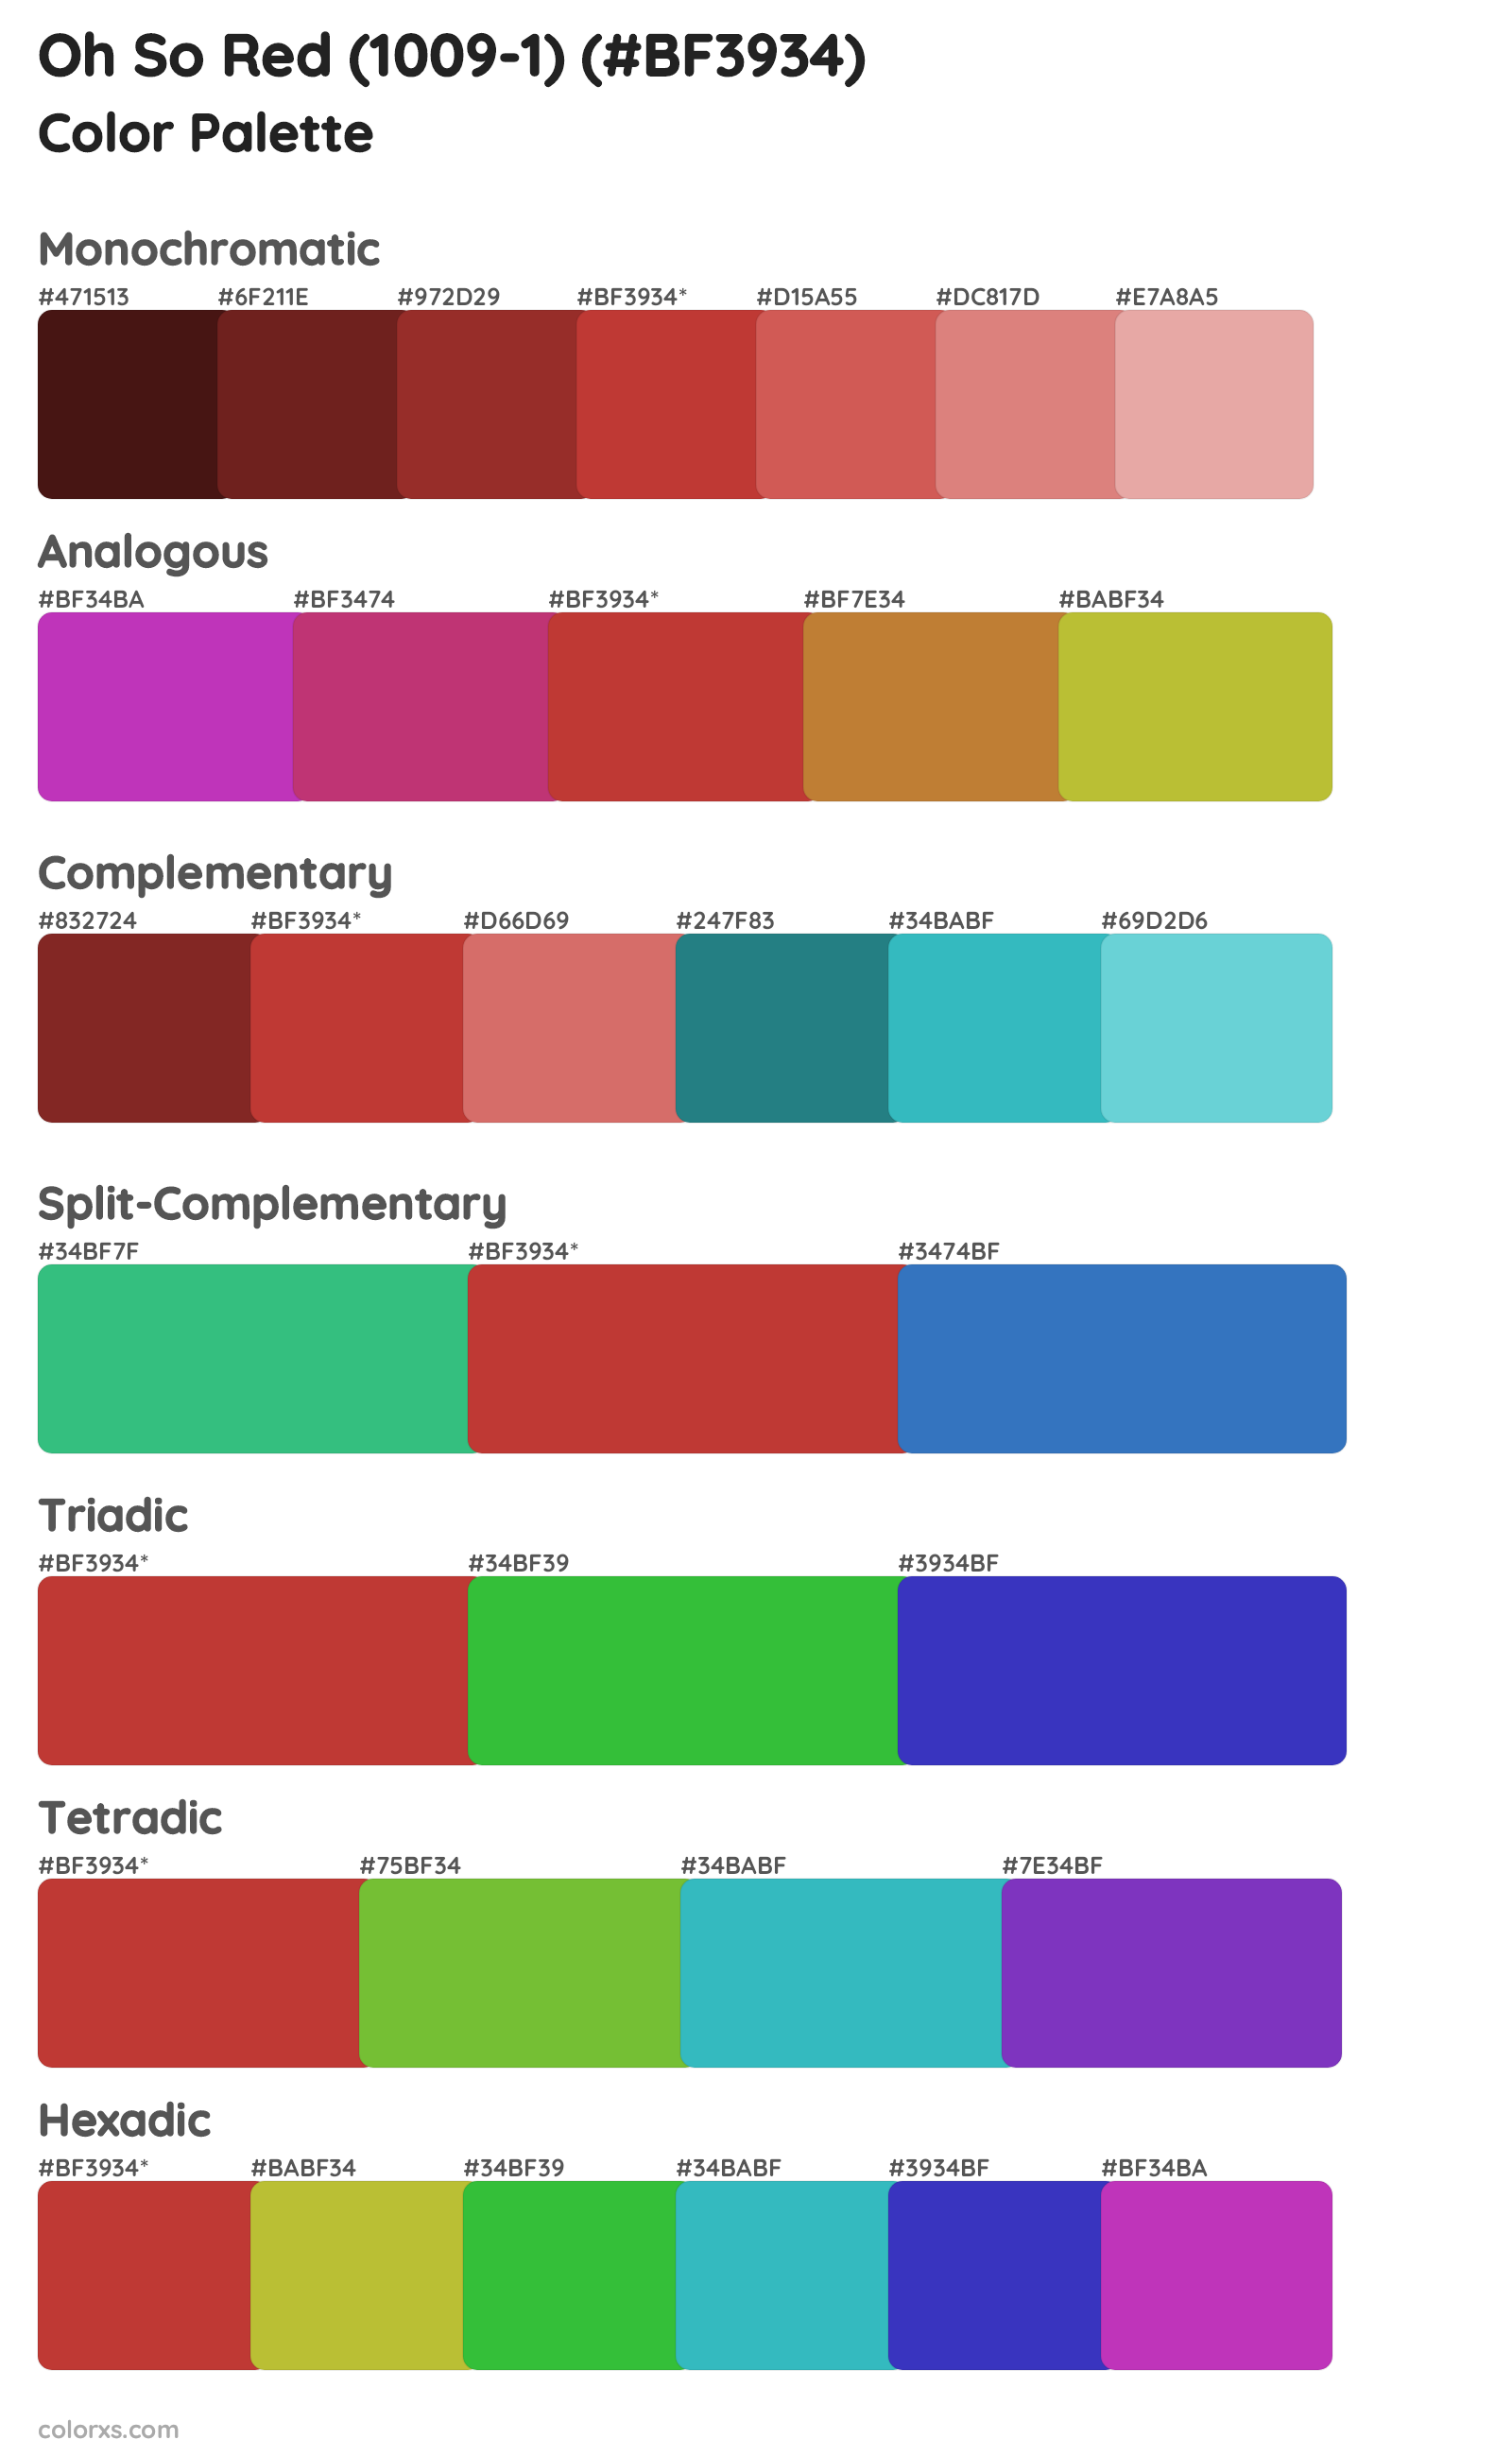 Oh So Red (1009-1) Color Scheme Palettes